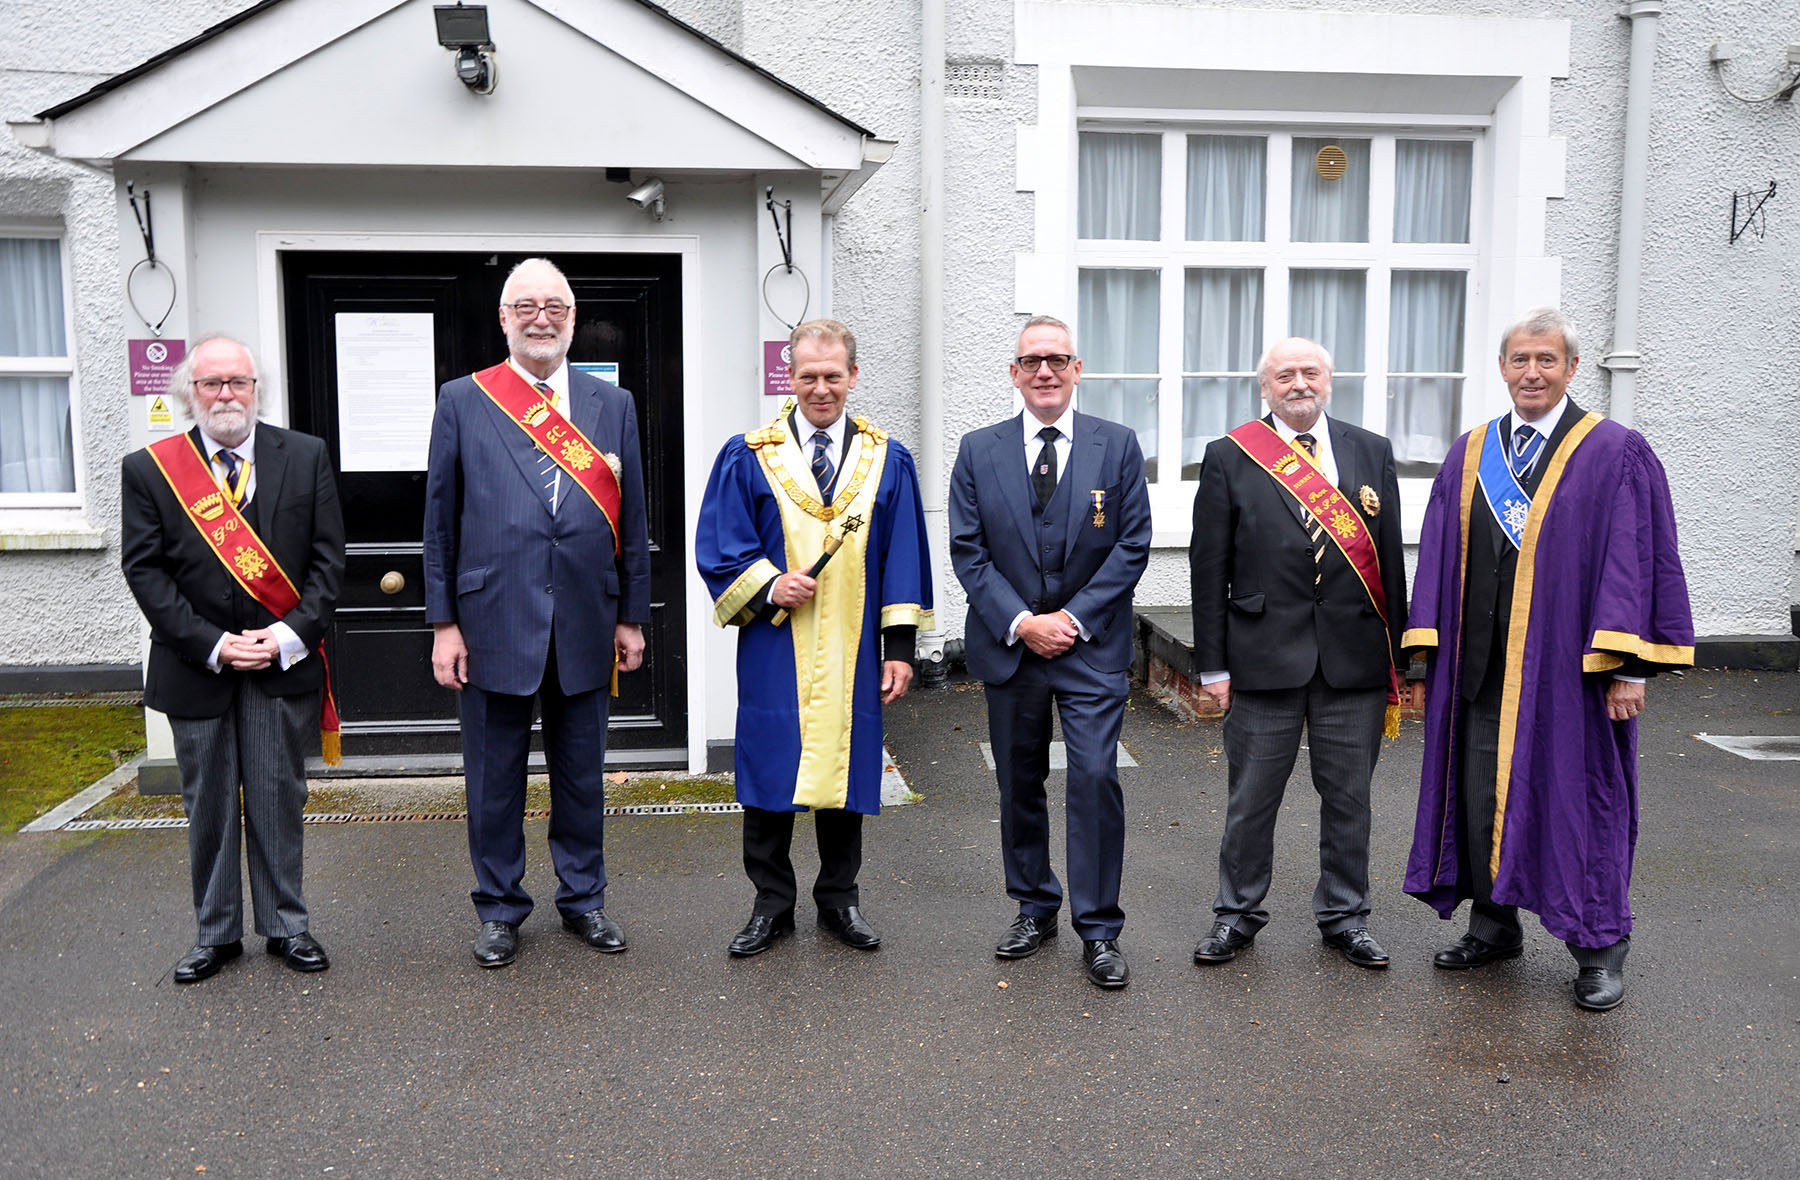 A Special Day for Warlingham Conclave